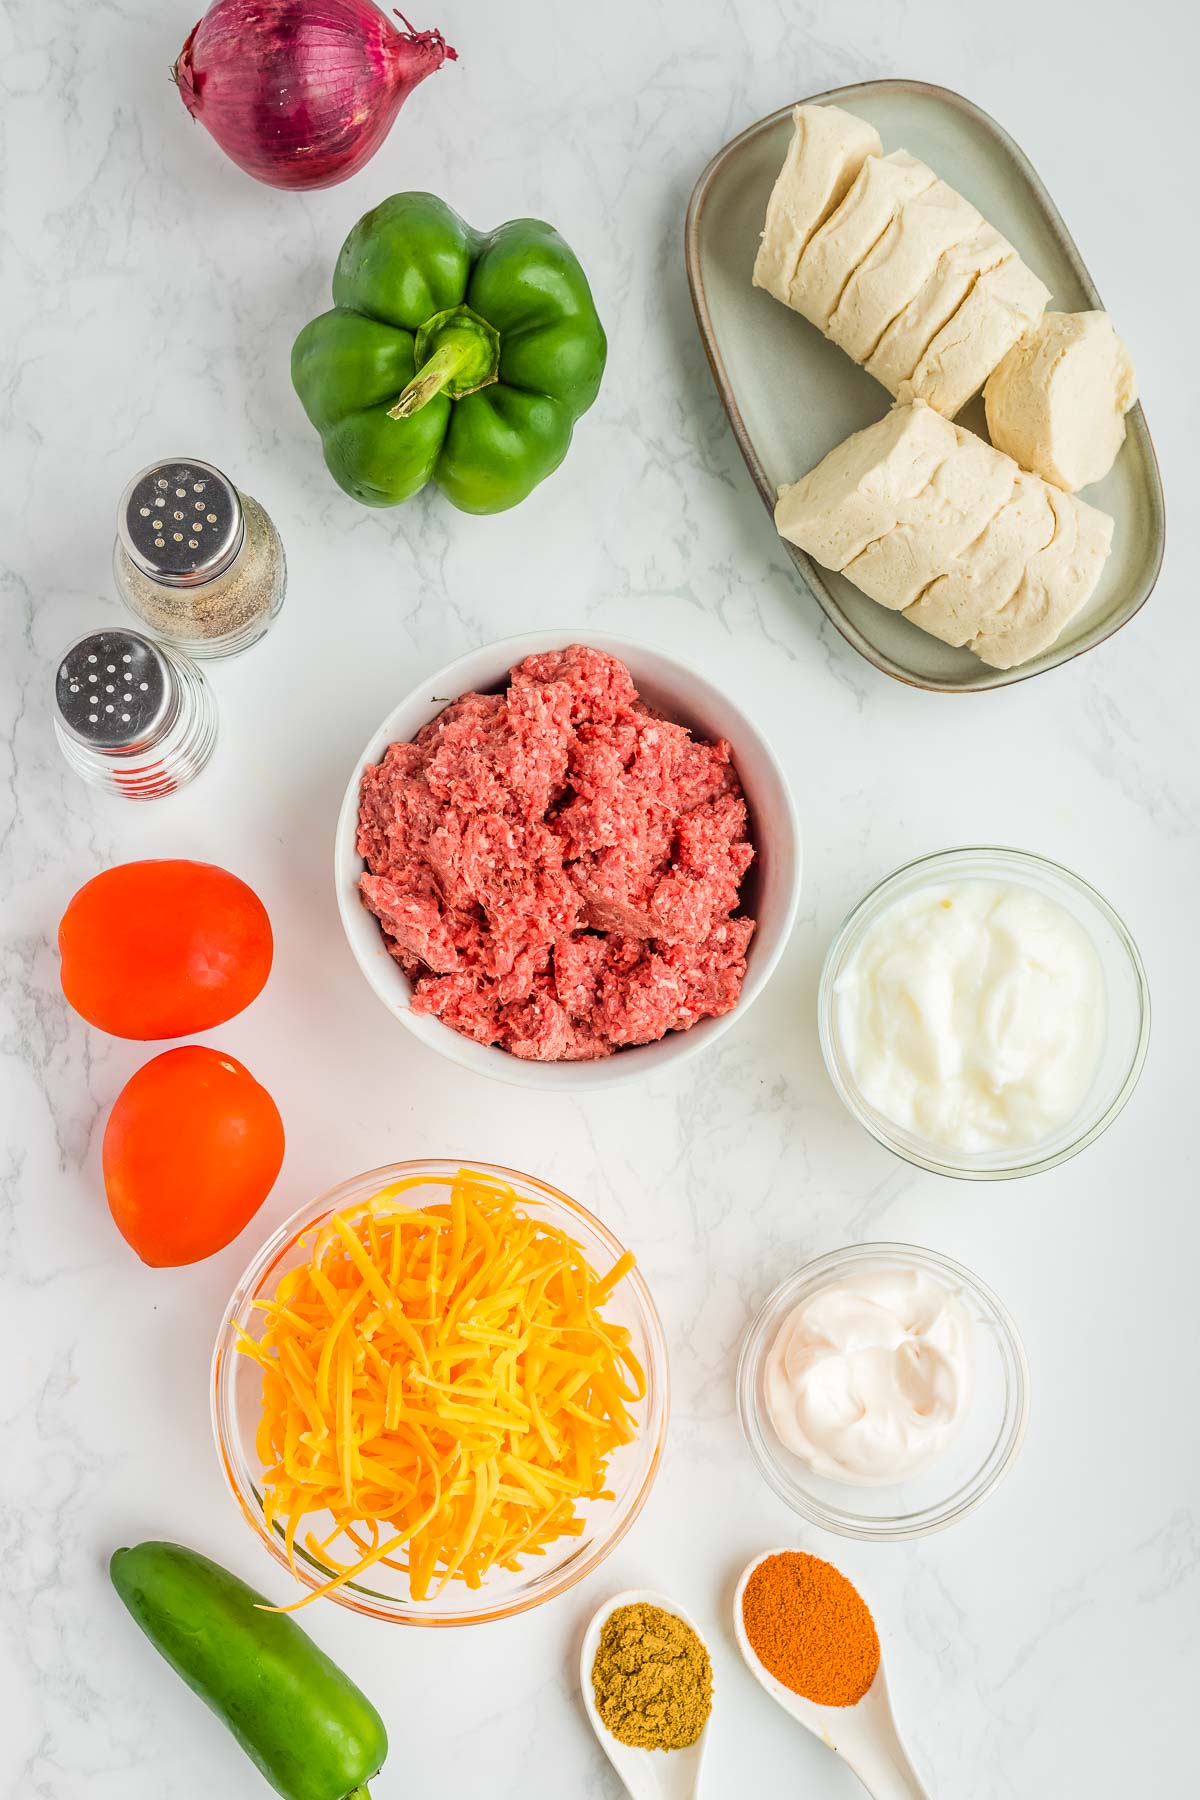 Ingredients for John Wayne Casserole in bowls on a white background.